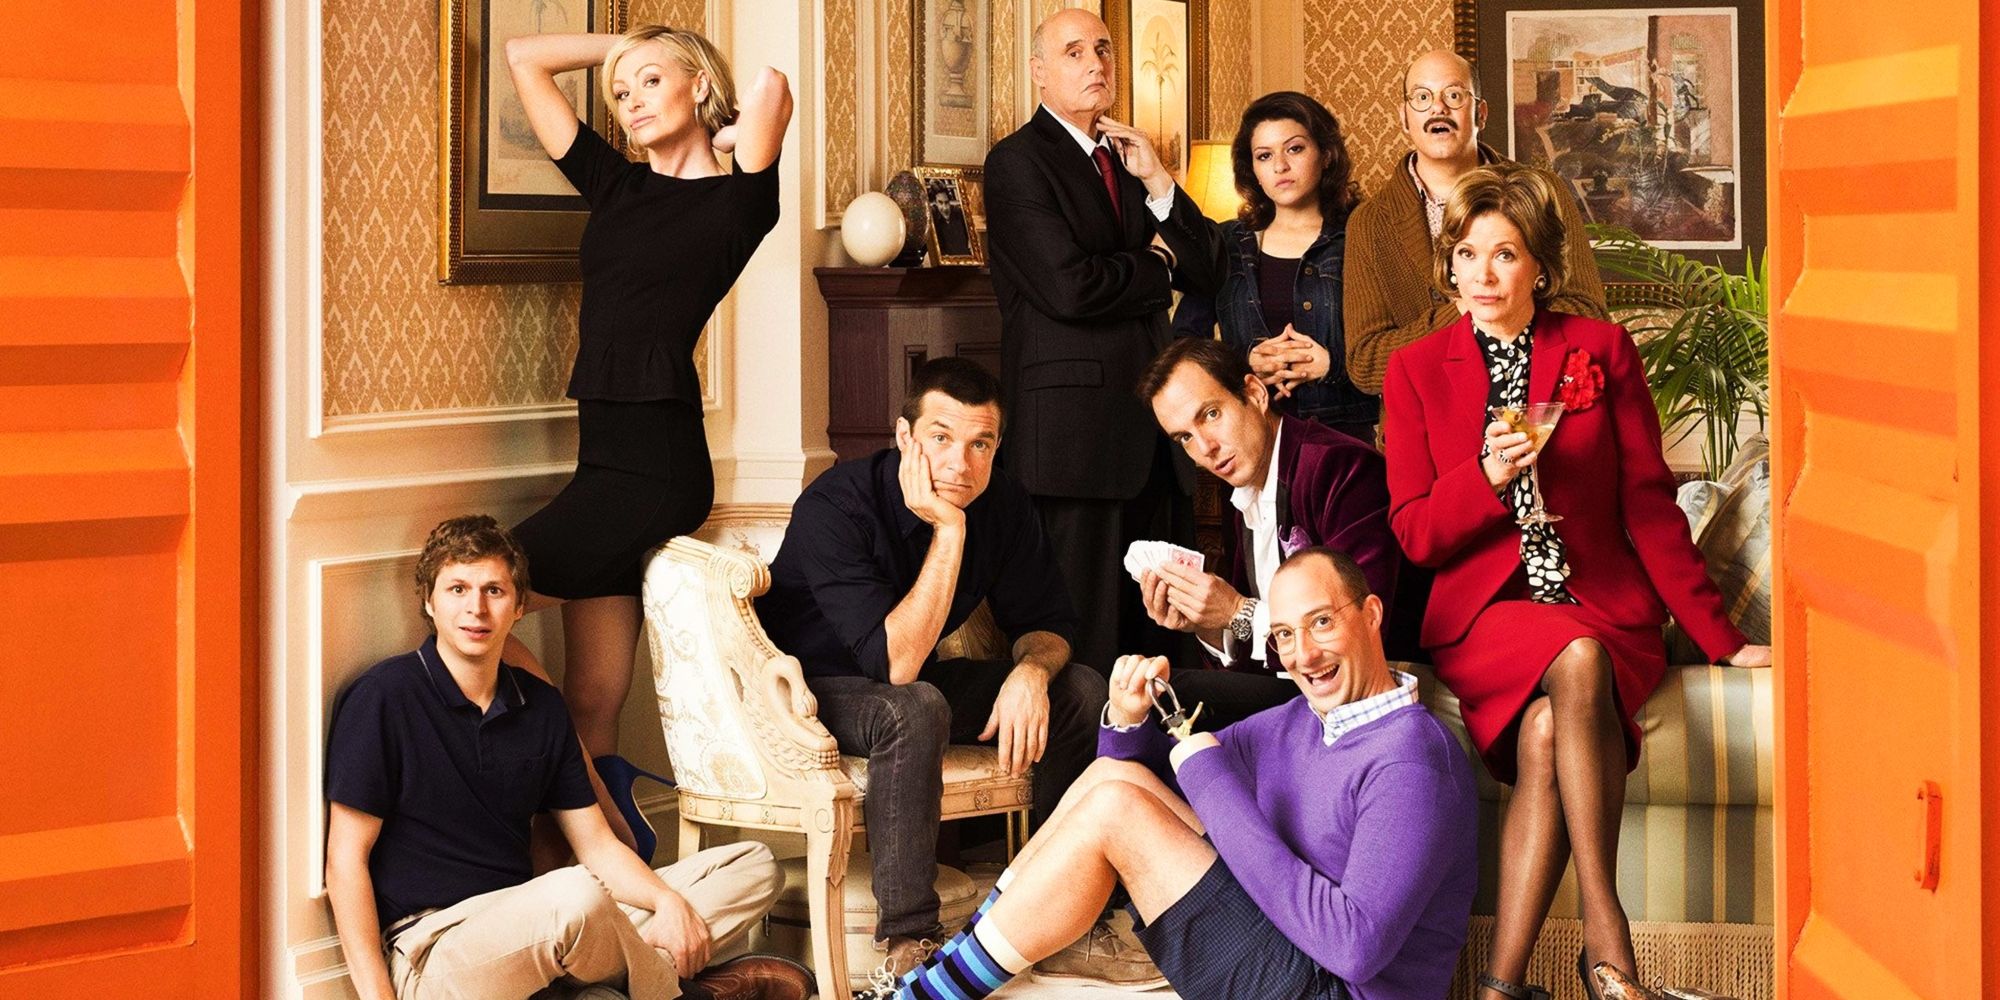 The Arrested Development cast